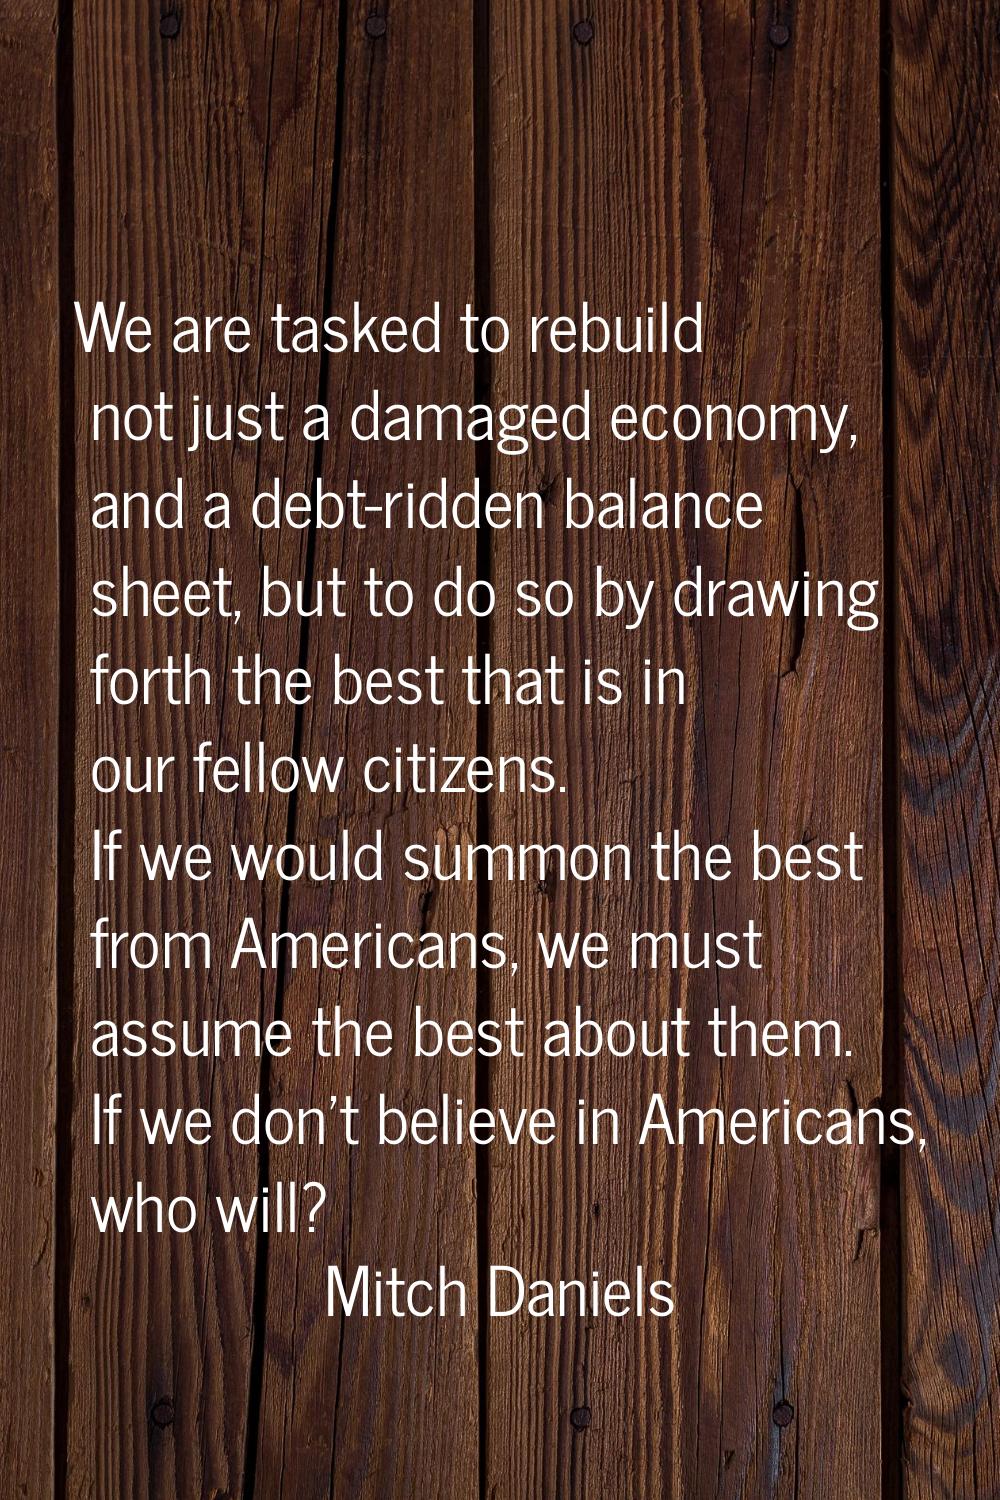 We are tasked to rebuild not just a damaged economy, and a debt-ridden balance sheet, but to do so 